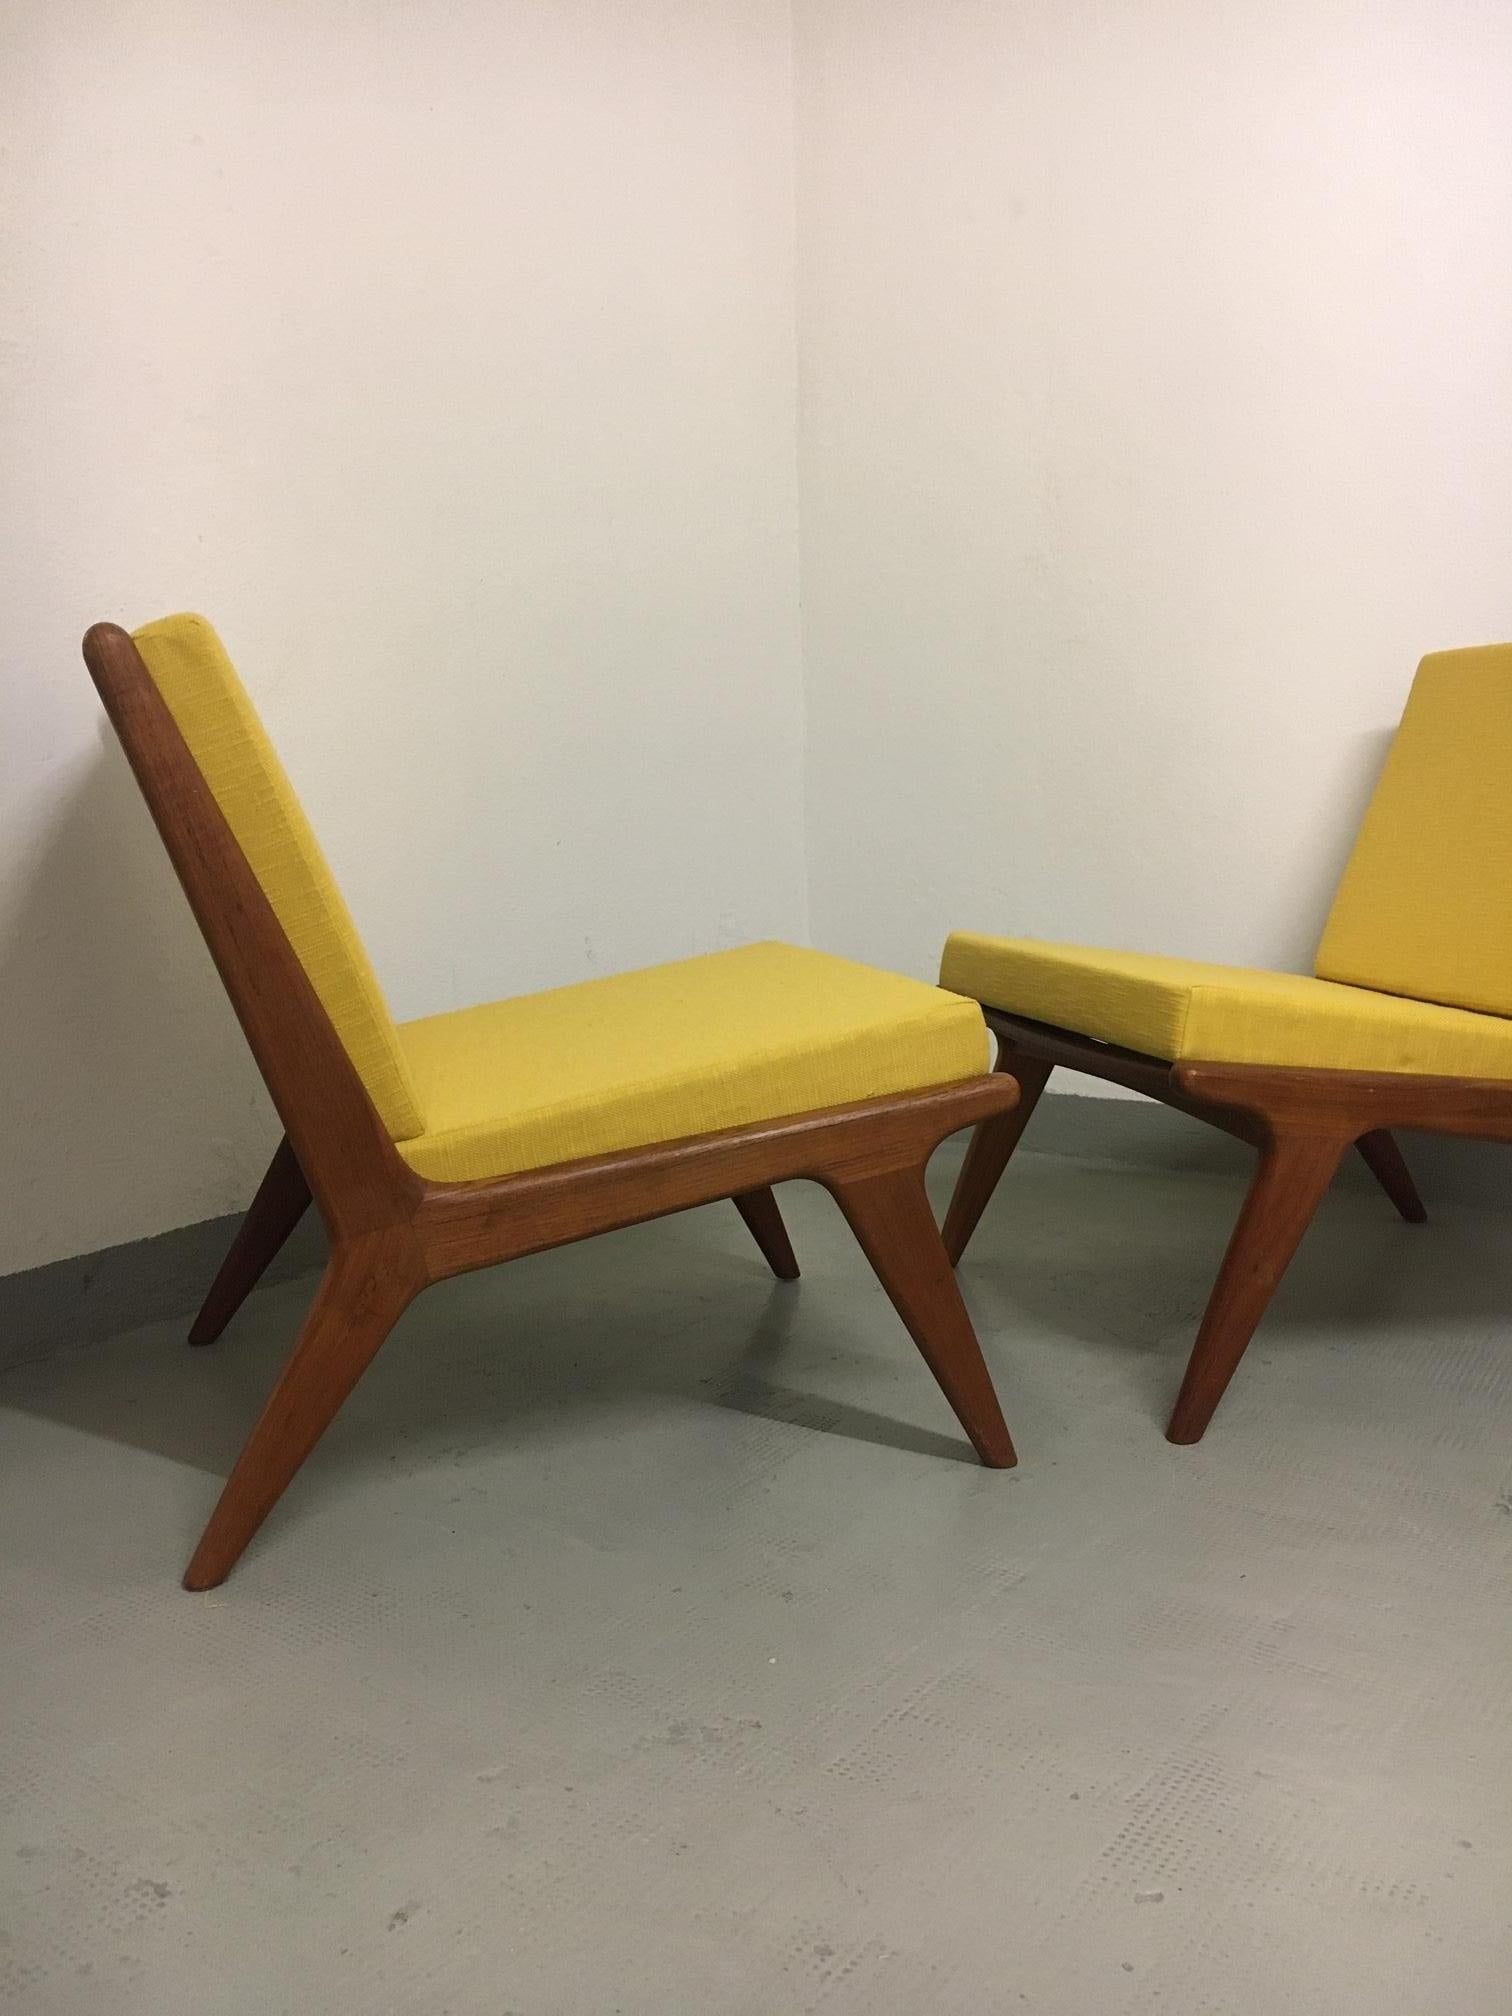 Elegant pair of teak and yellow fabric easy chairs produced in Denmark, circa 1960
Very good condition. Newly reupholstered, with new foam.
Measures: W 60 x D 70 x H 70 cm.